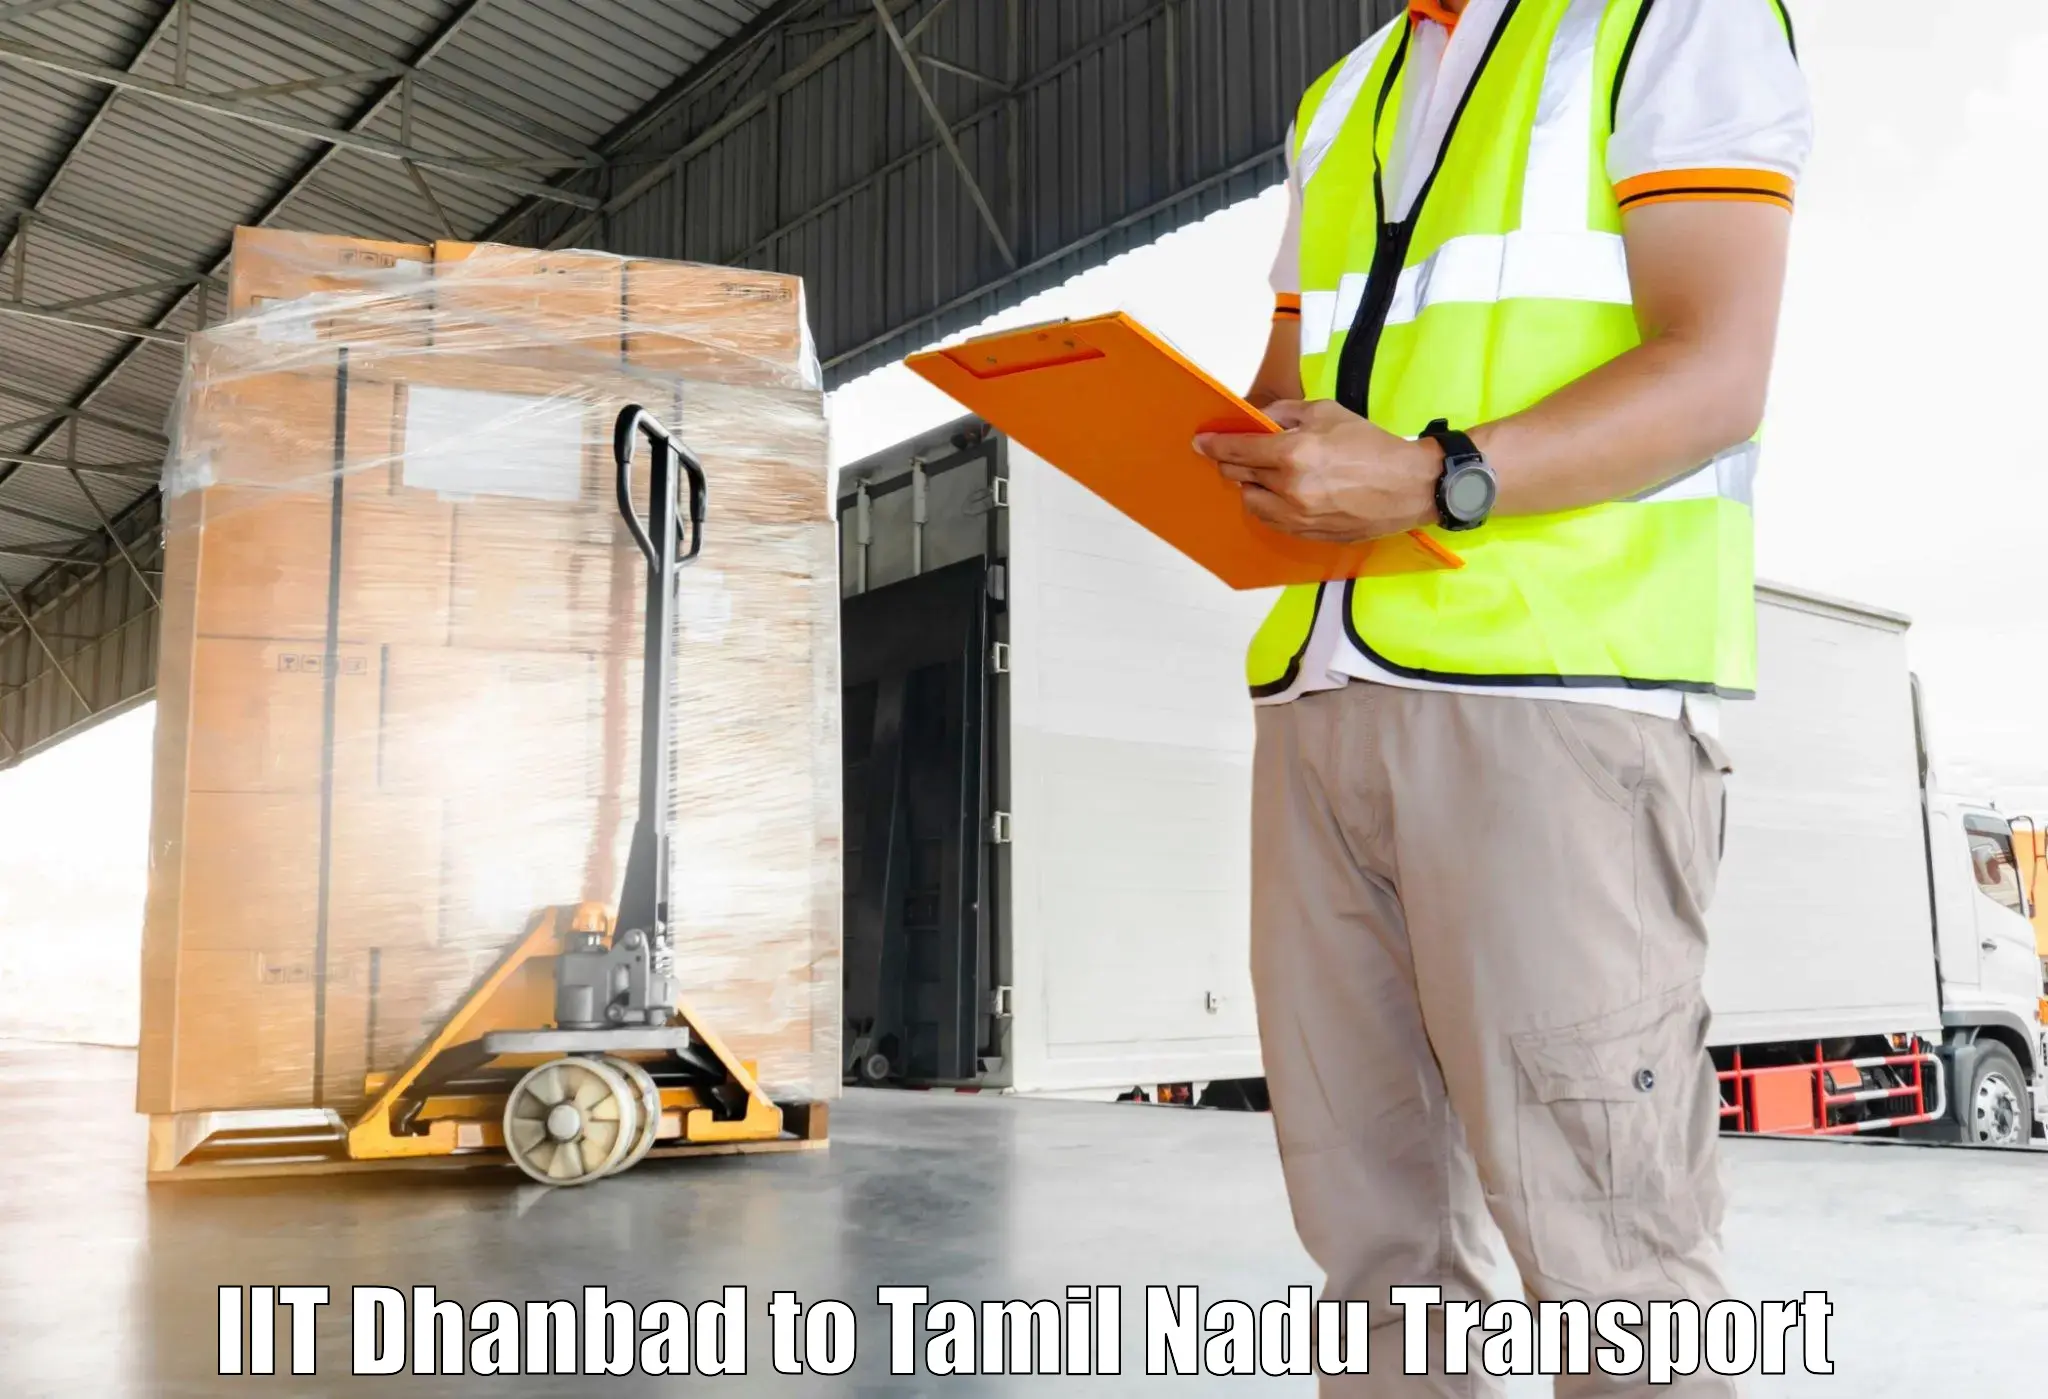 Air freight transport services IIT Dhanbad to Srirangam